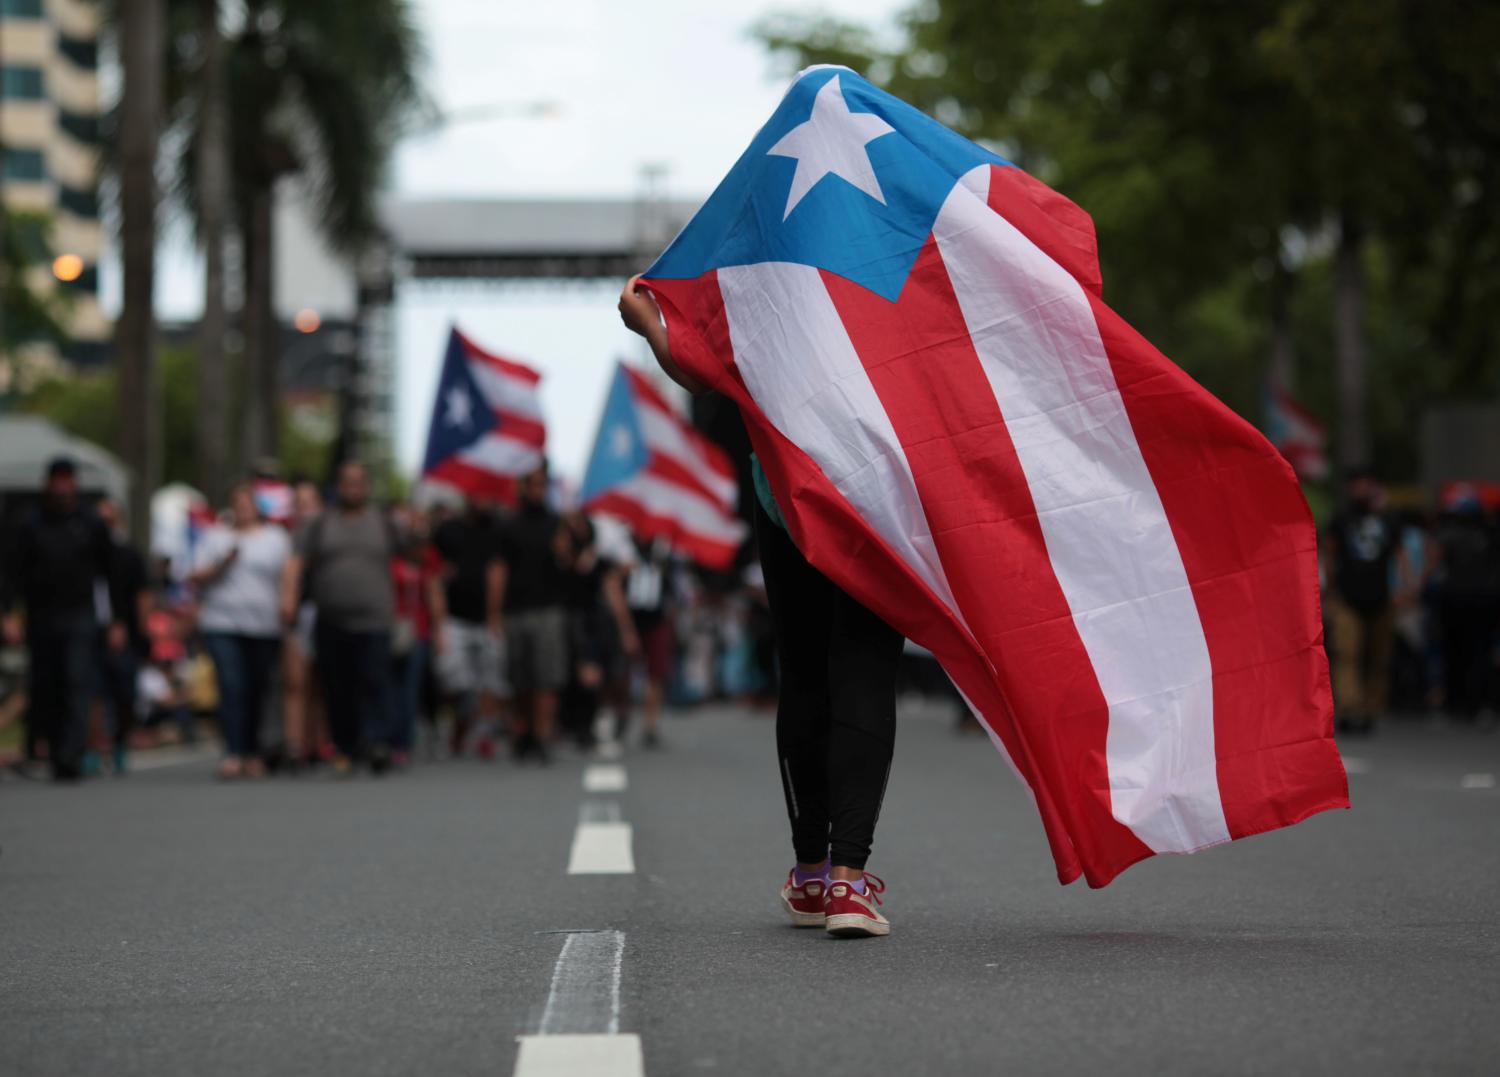 A person carries a Puerto Rican national flag during a protest against the government's austerity measures as Puerto Rico faces a deadline on Monday to restructure its $70 billion debt load or open itself up to lawsuits from creditors, in San Juan, Puerto Rico May 1, 2017. REUTERS/Alvin Baez - RC1B567AF880